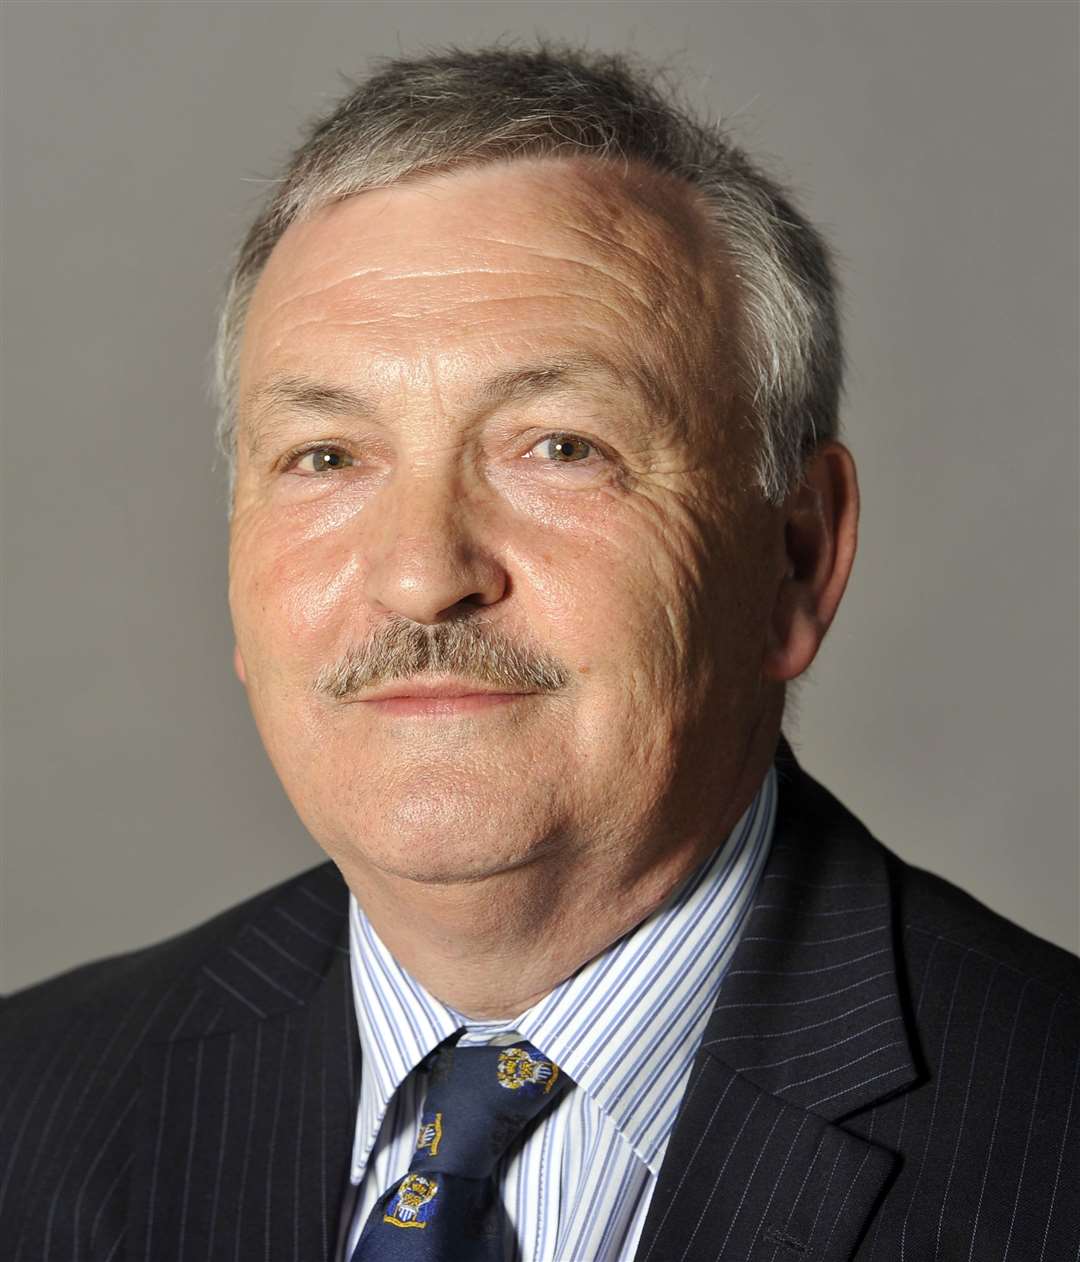 Medway Council leader Alan Jarrett says any move would be some time in the future